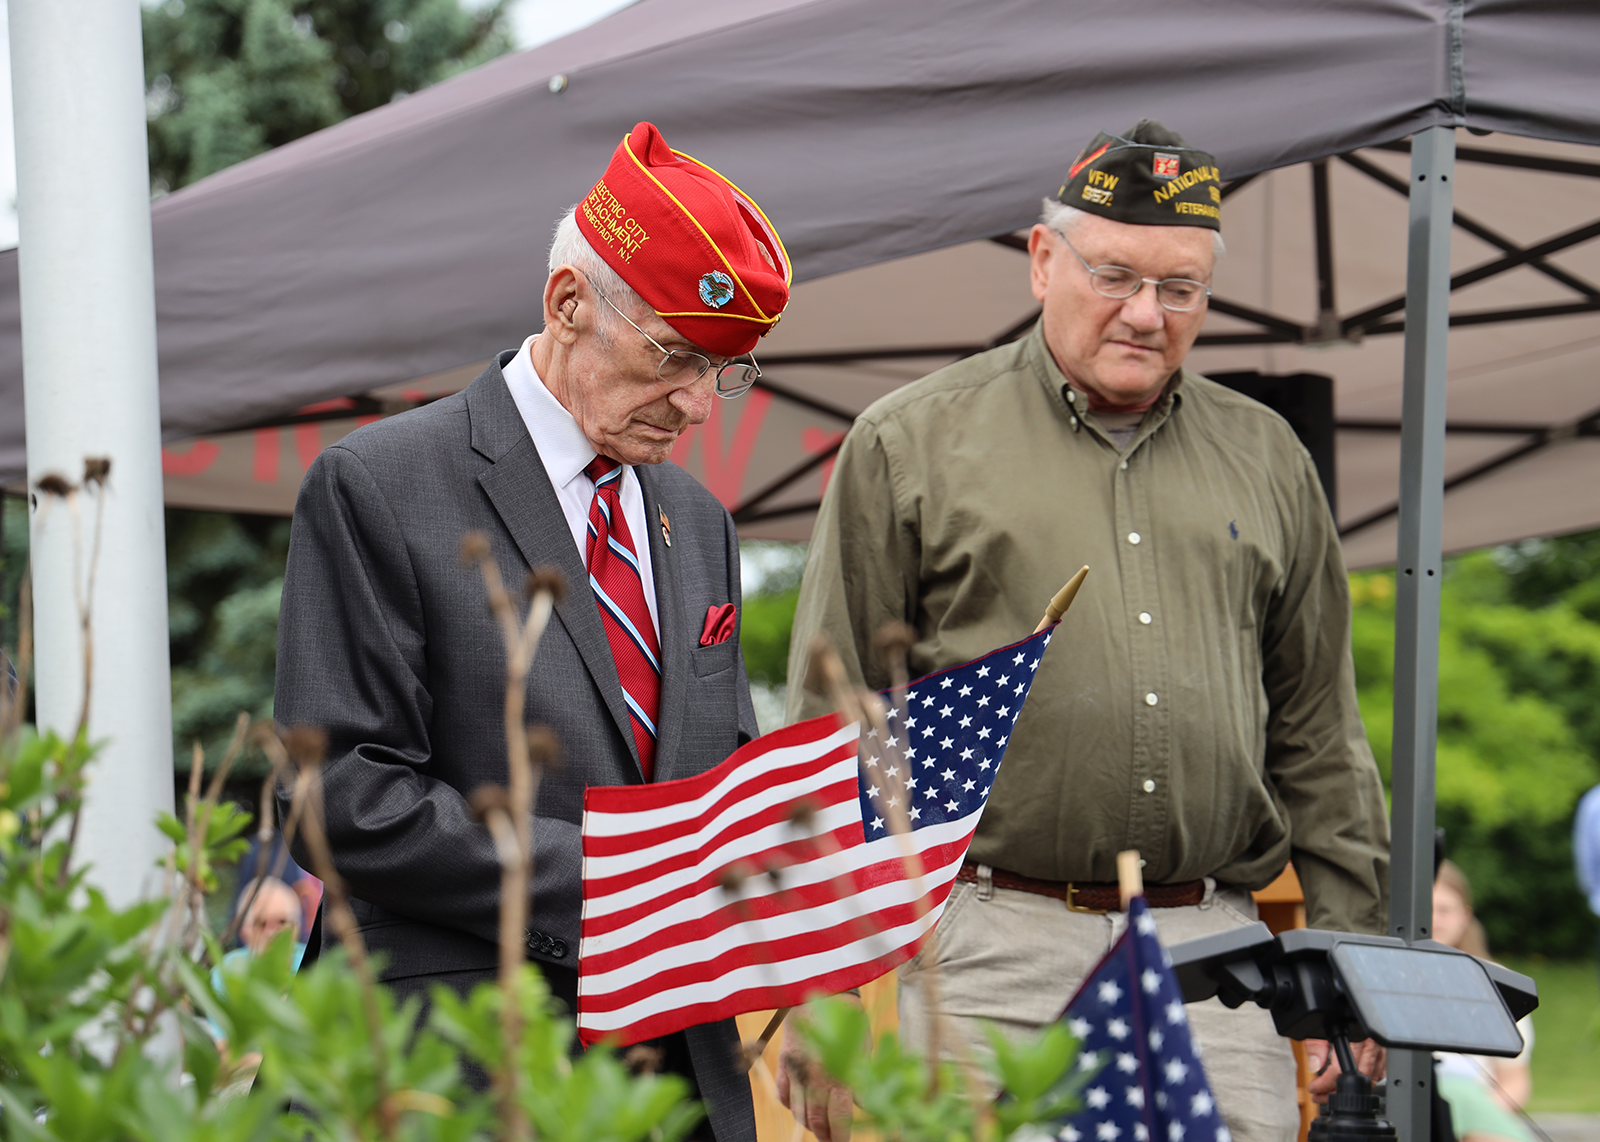 Two veterans wearing military hats gaze solemnly at the ground